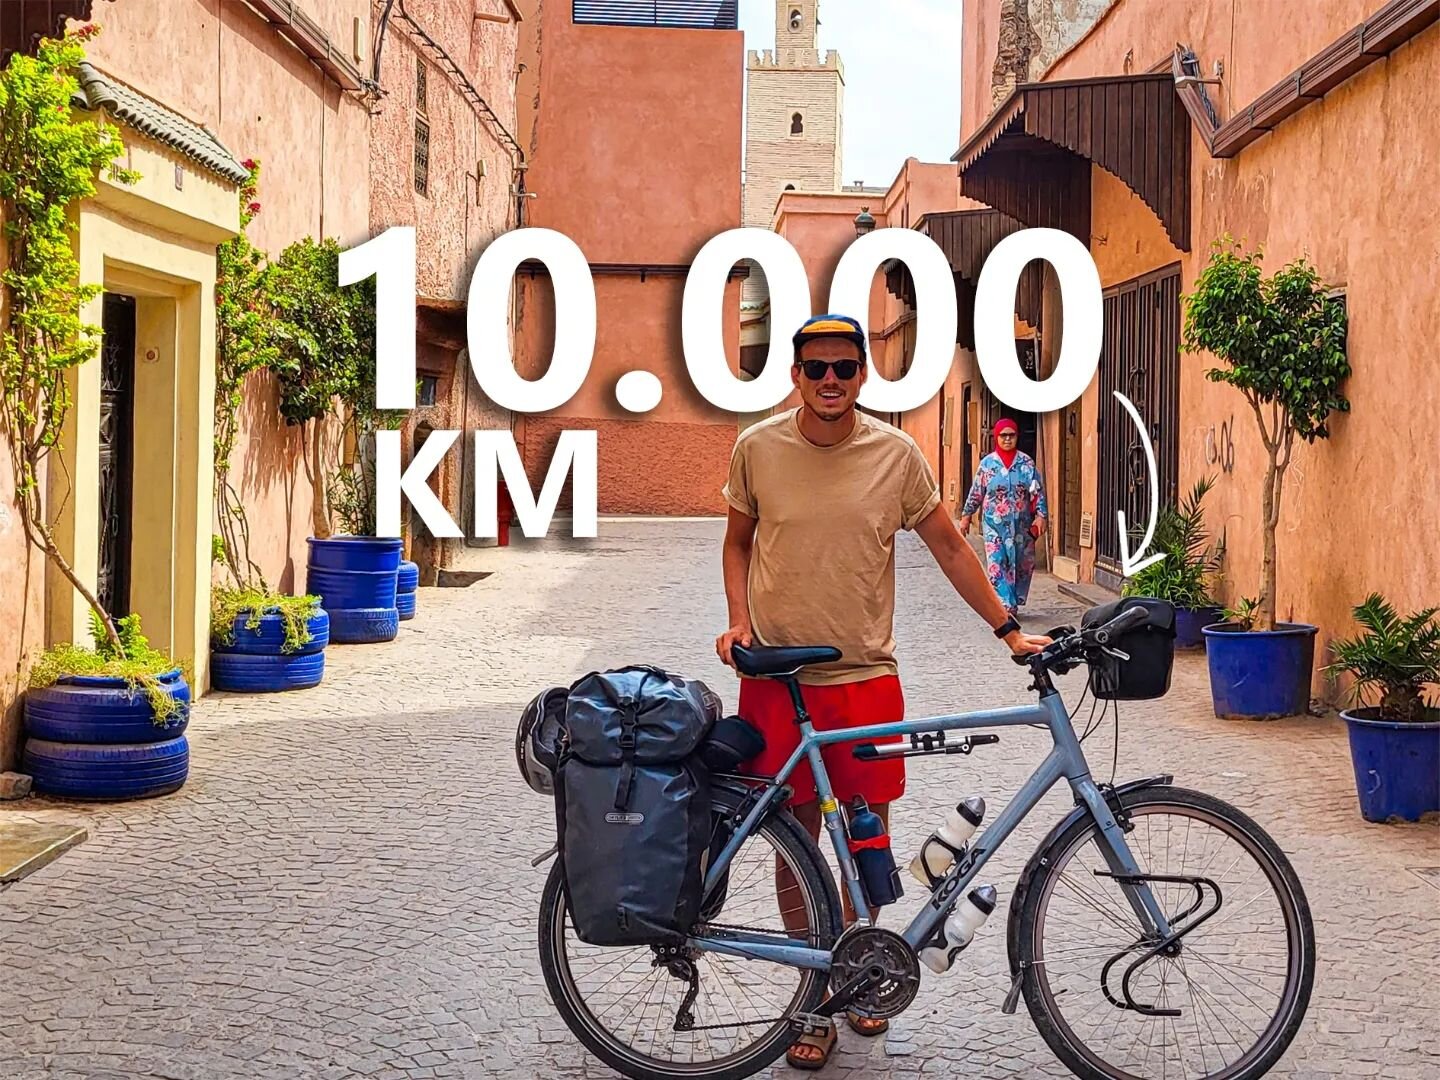 10.000 km on this bicycle!

During our trip through Morocco I reached the mile stone of cycling 10.000 kilometers on this bike. I still remember buying it at the @devakantiefietser in Amsterdam, ready to take off on an epic adventure to China. I've  